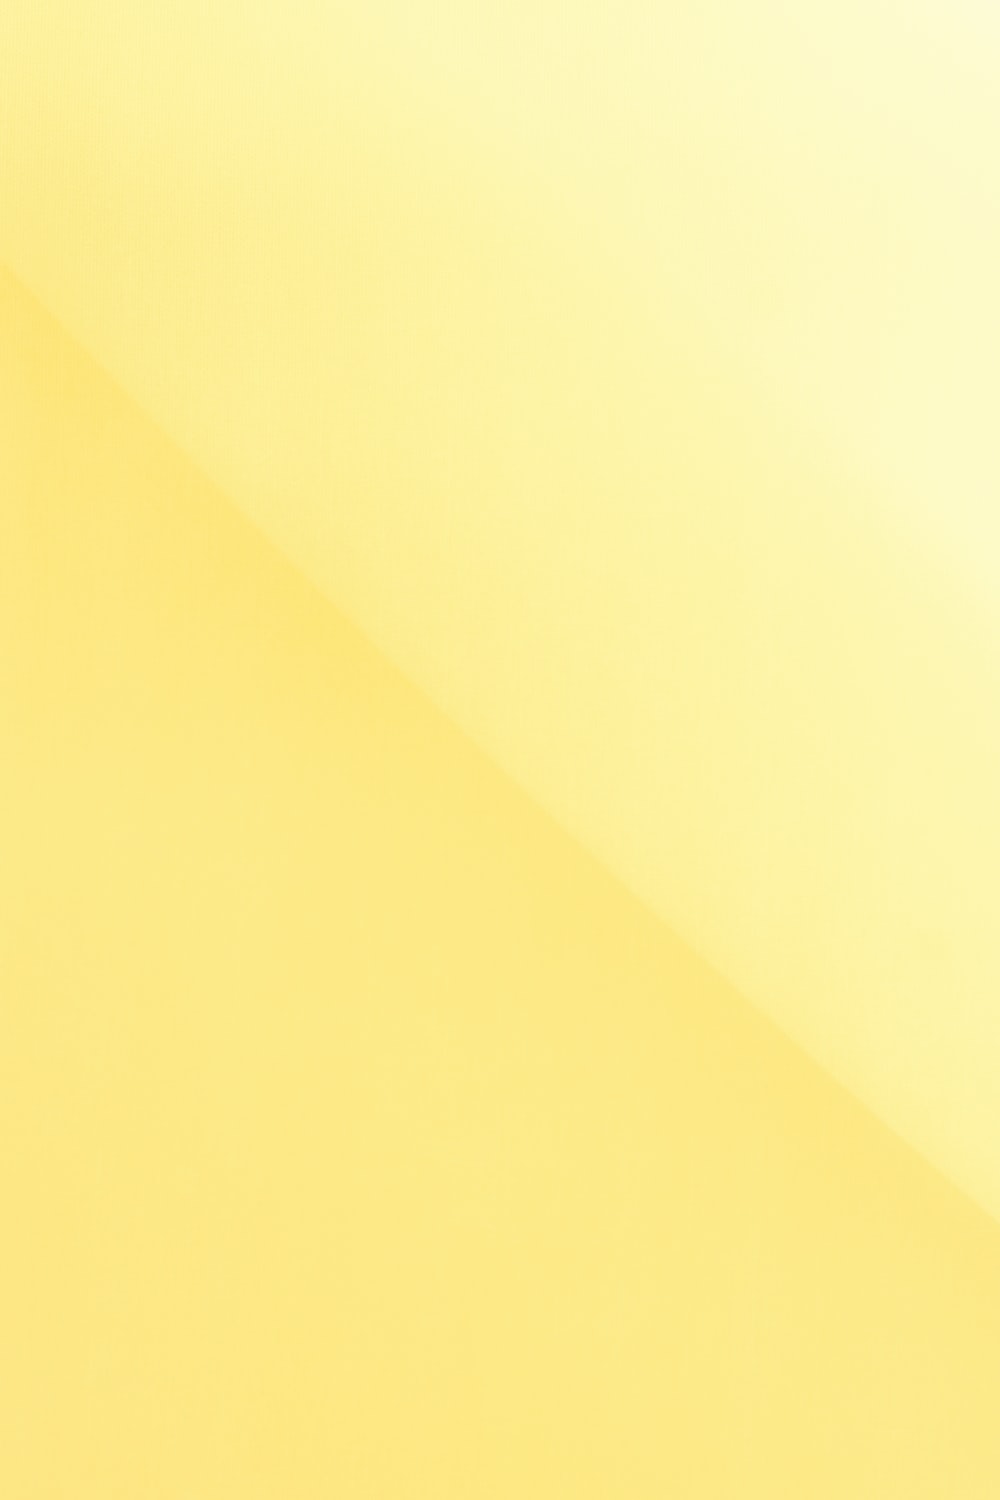 Pastel Yellow Picture. Download Free Image